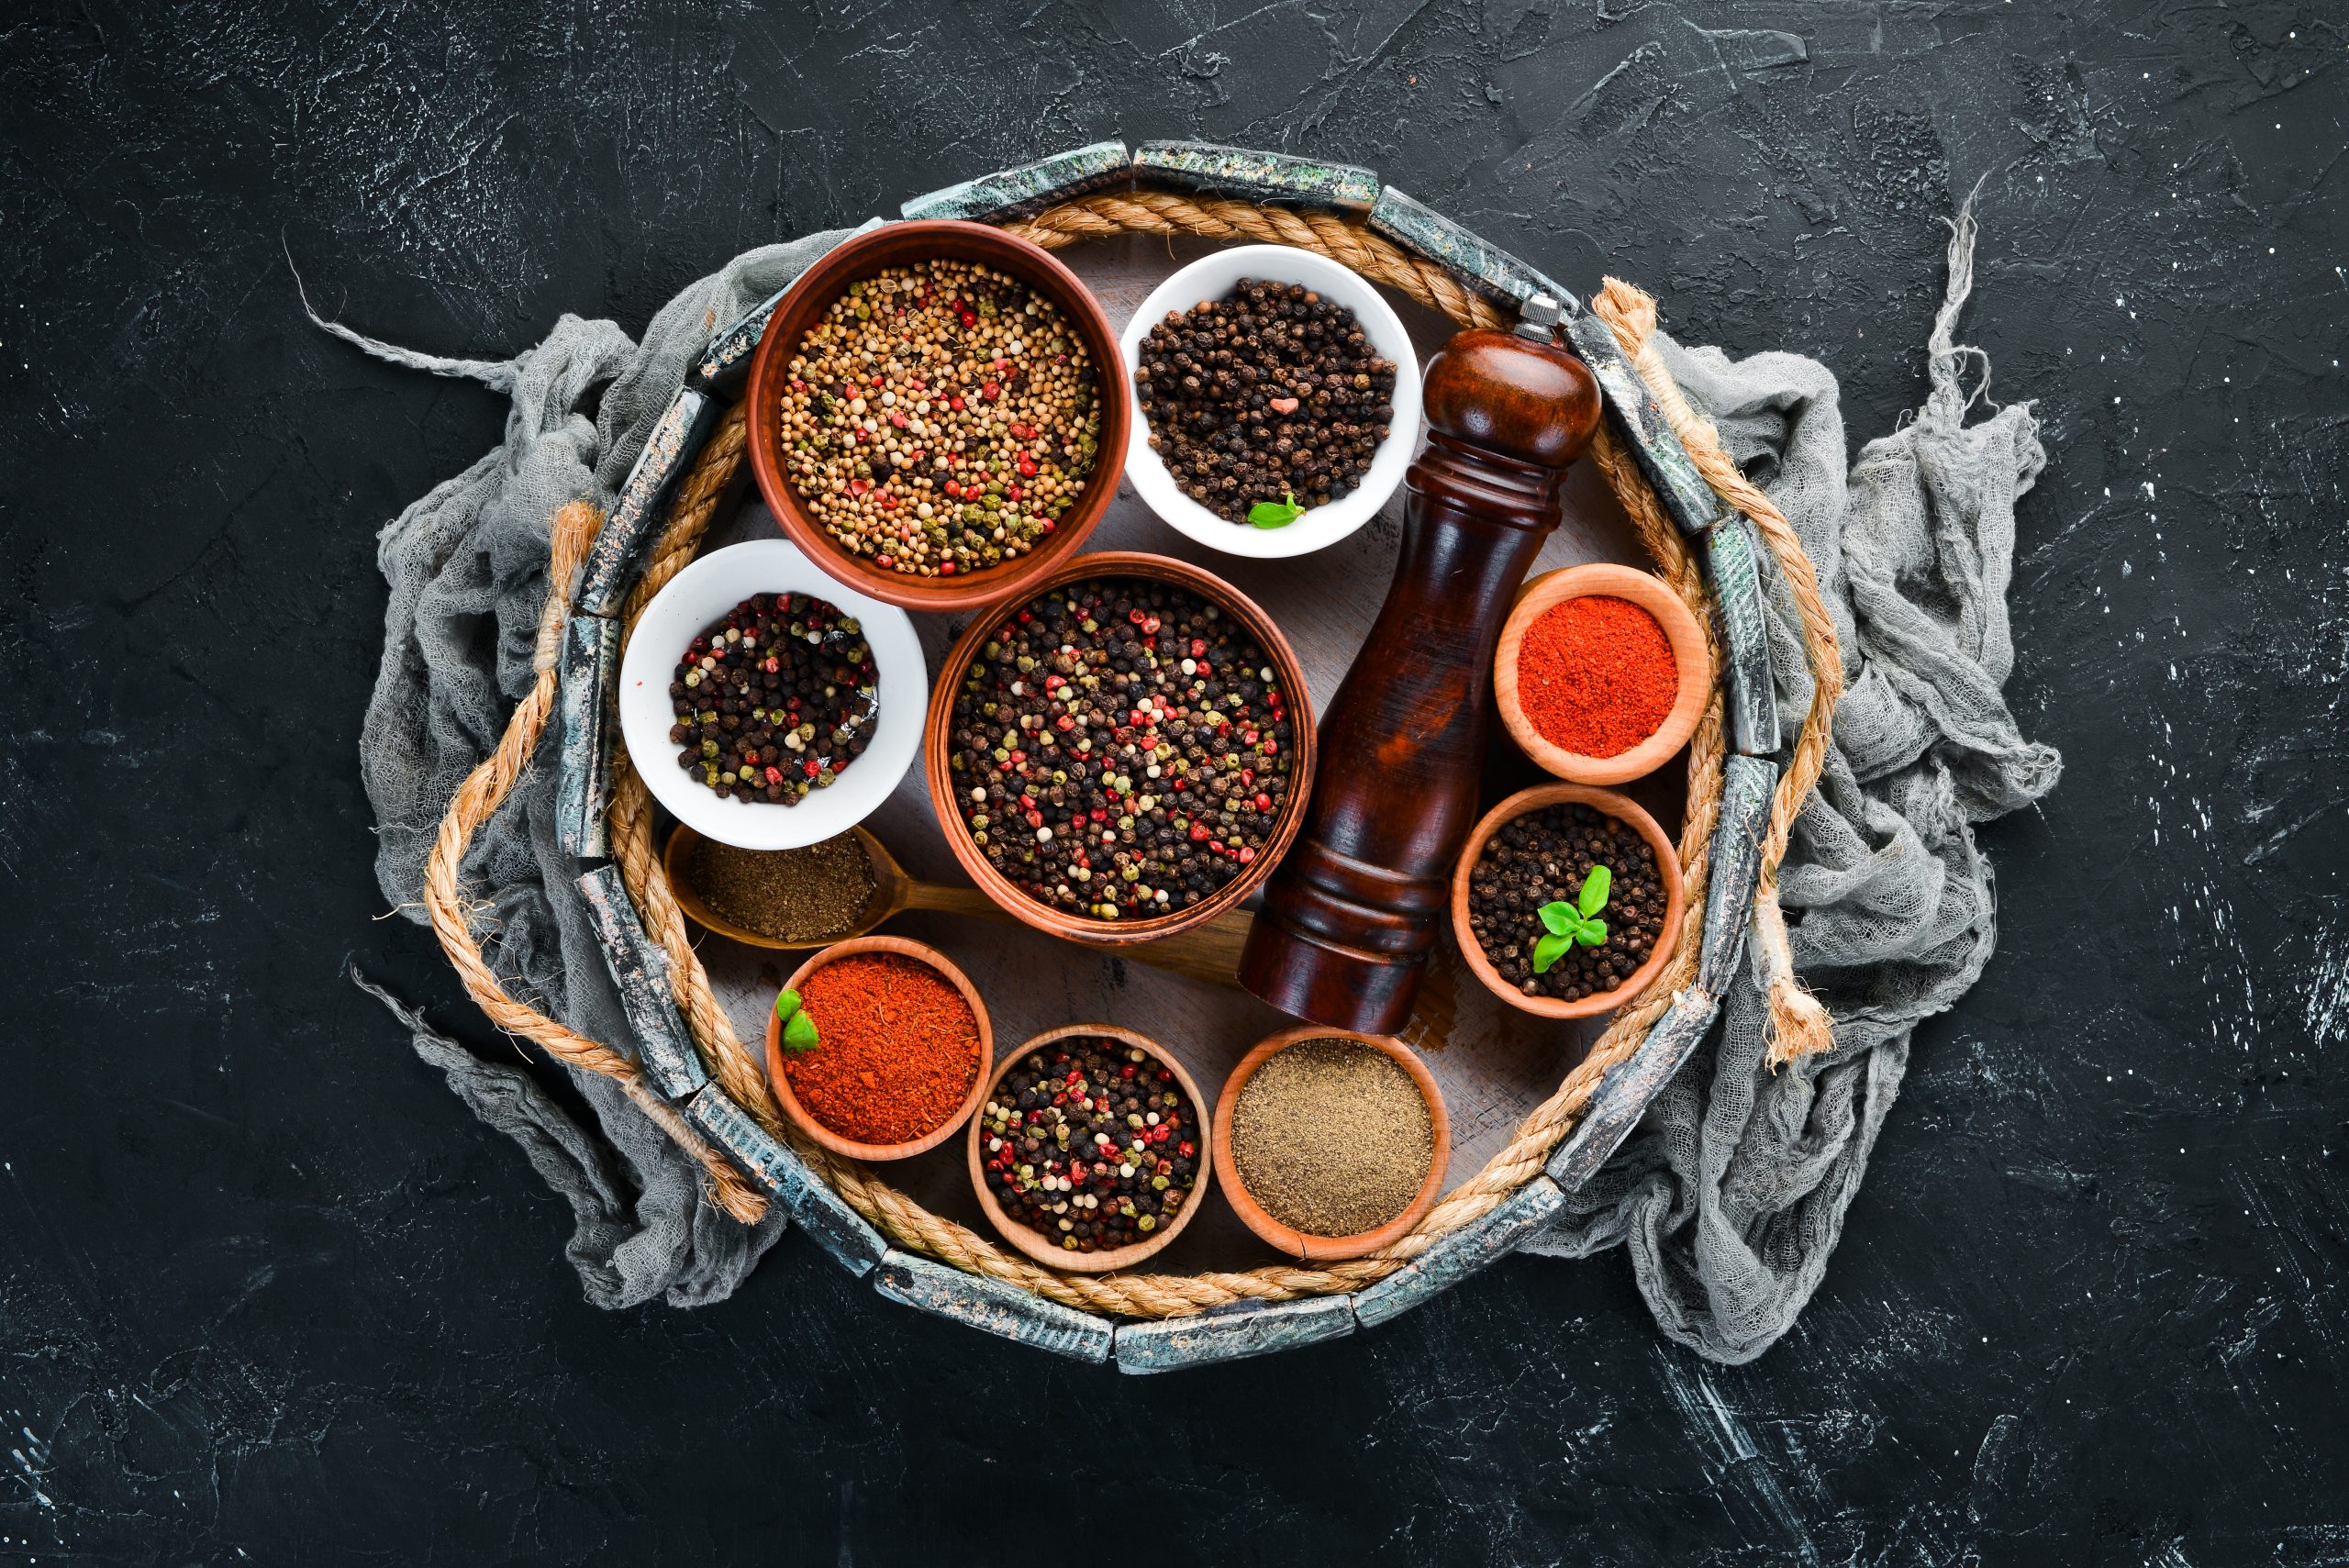 Spice Up Your Weight Loss: How Adding Spices to Your Meals Can Support Your Weight Loss Journey